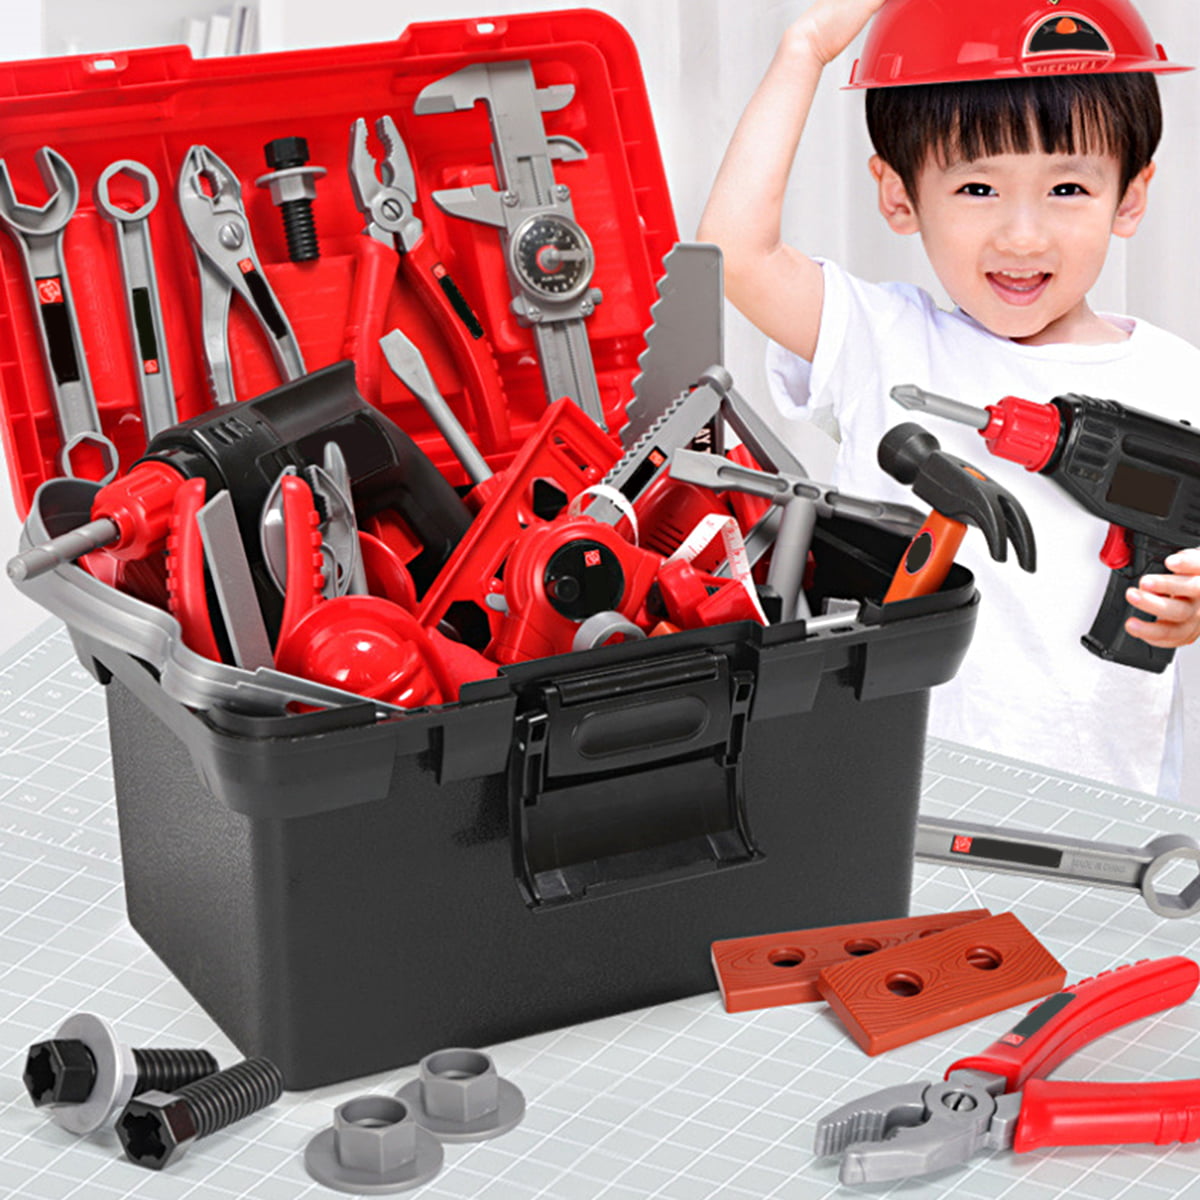 Toy Tool Set Workbench For Toddlers And Children Pretend Play